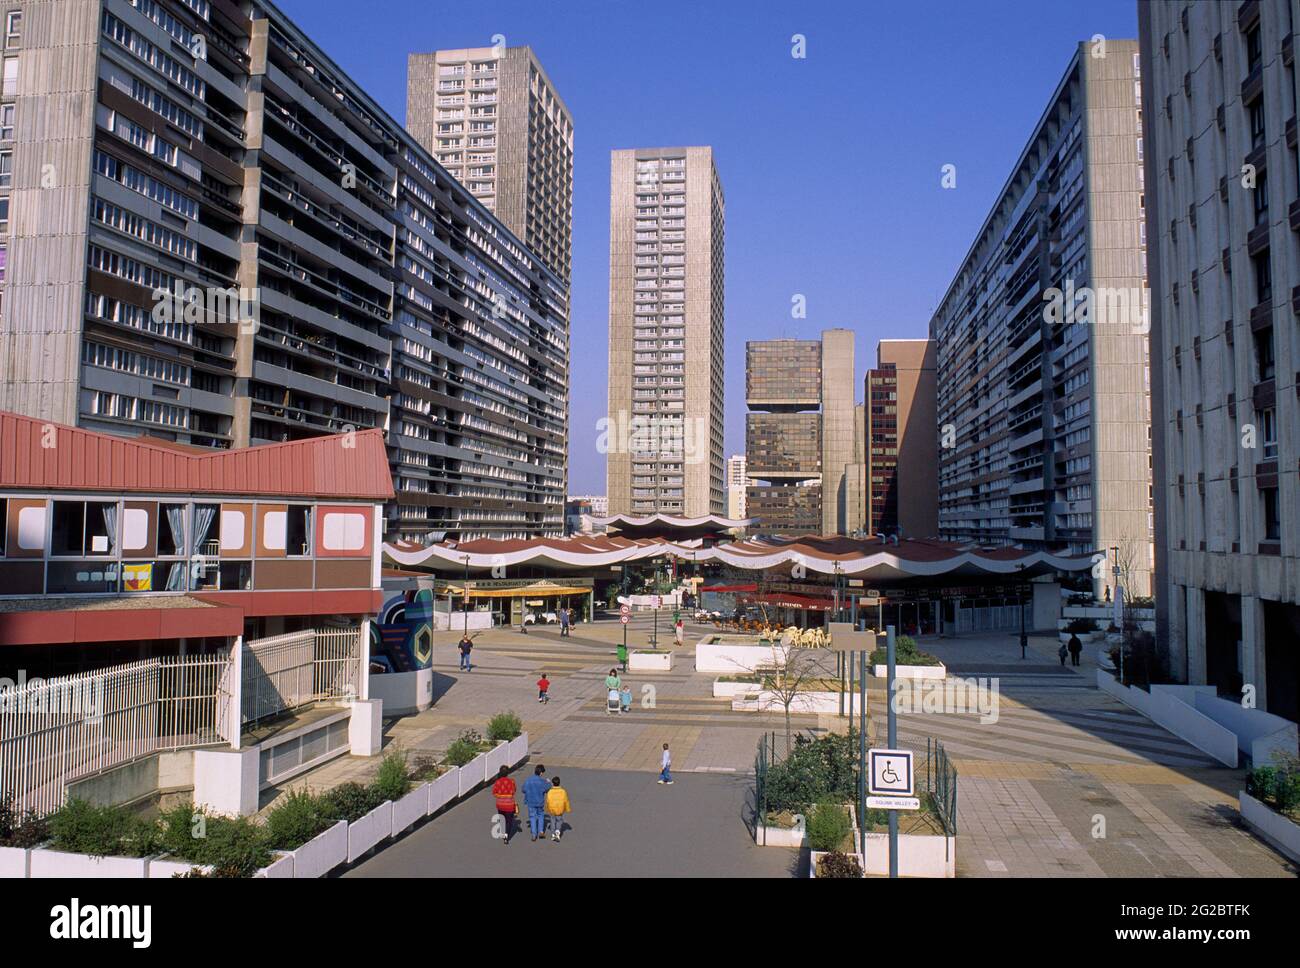 FRANCE. PARIS (75) 13 TH ARR. CHINATOWN. THE OLYMPIADES. RESTAURANT Stock Photo